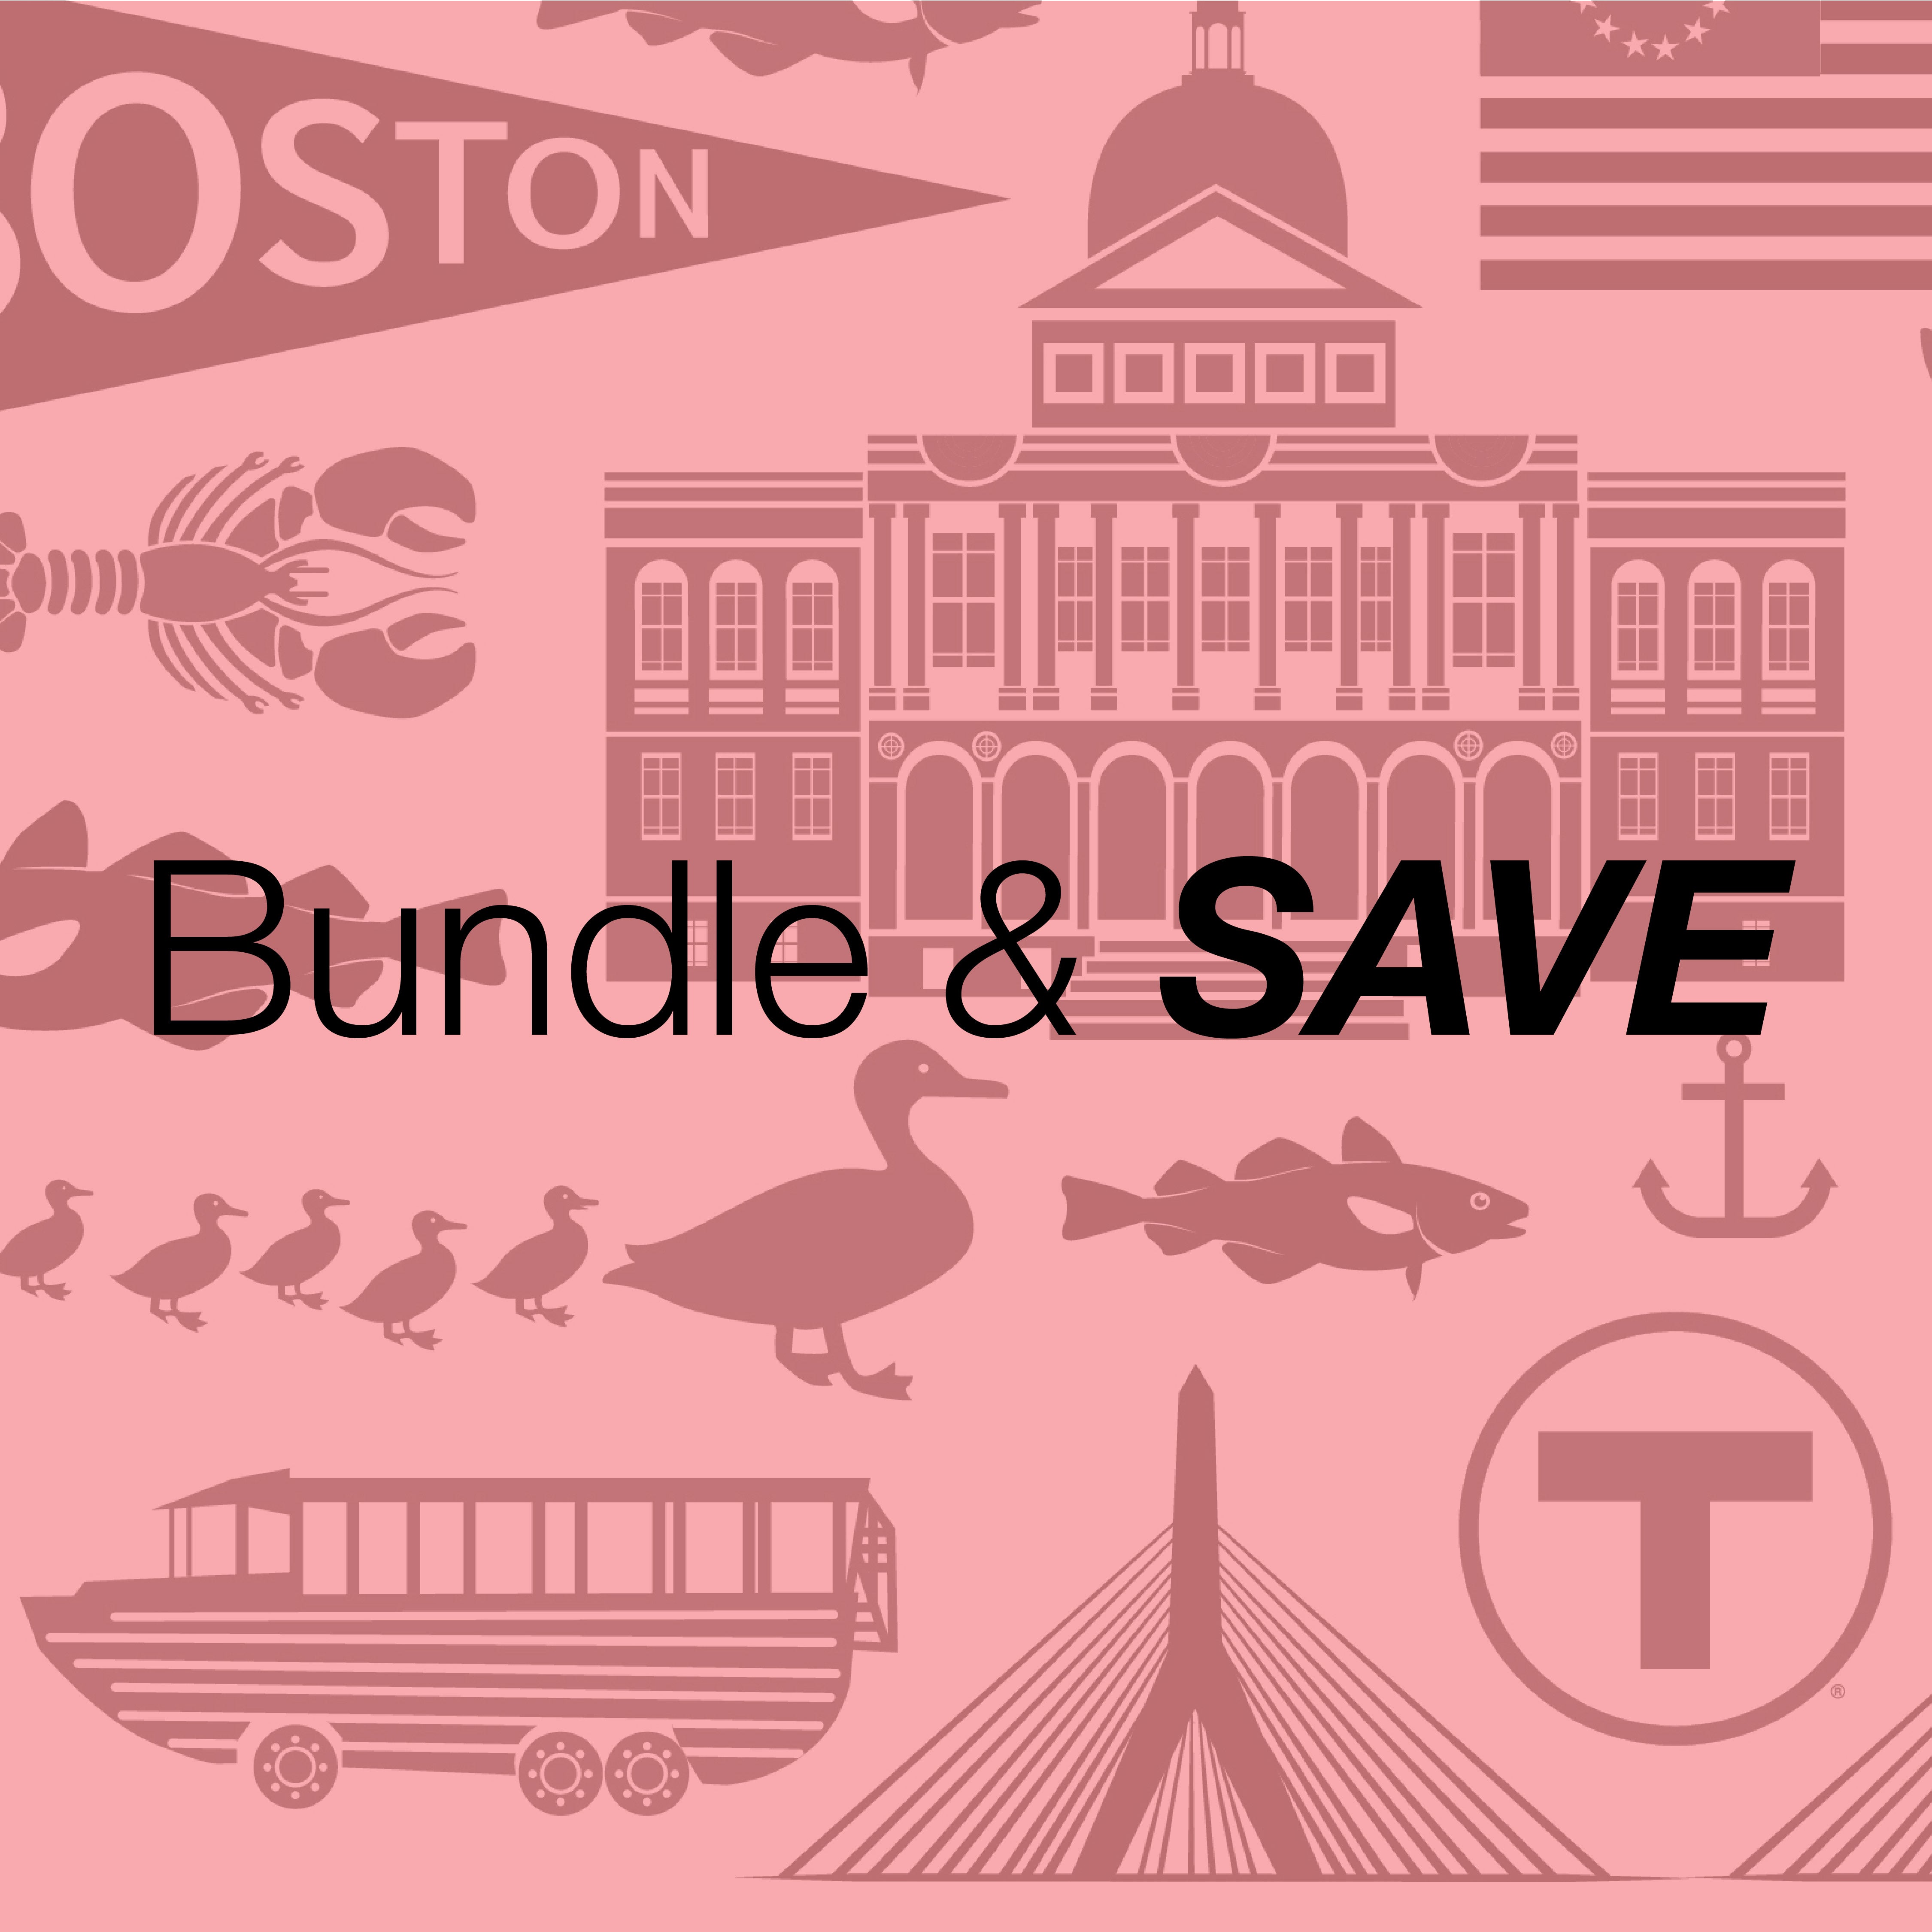 Save when you buy Boston themed gift bundle combinations for kids